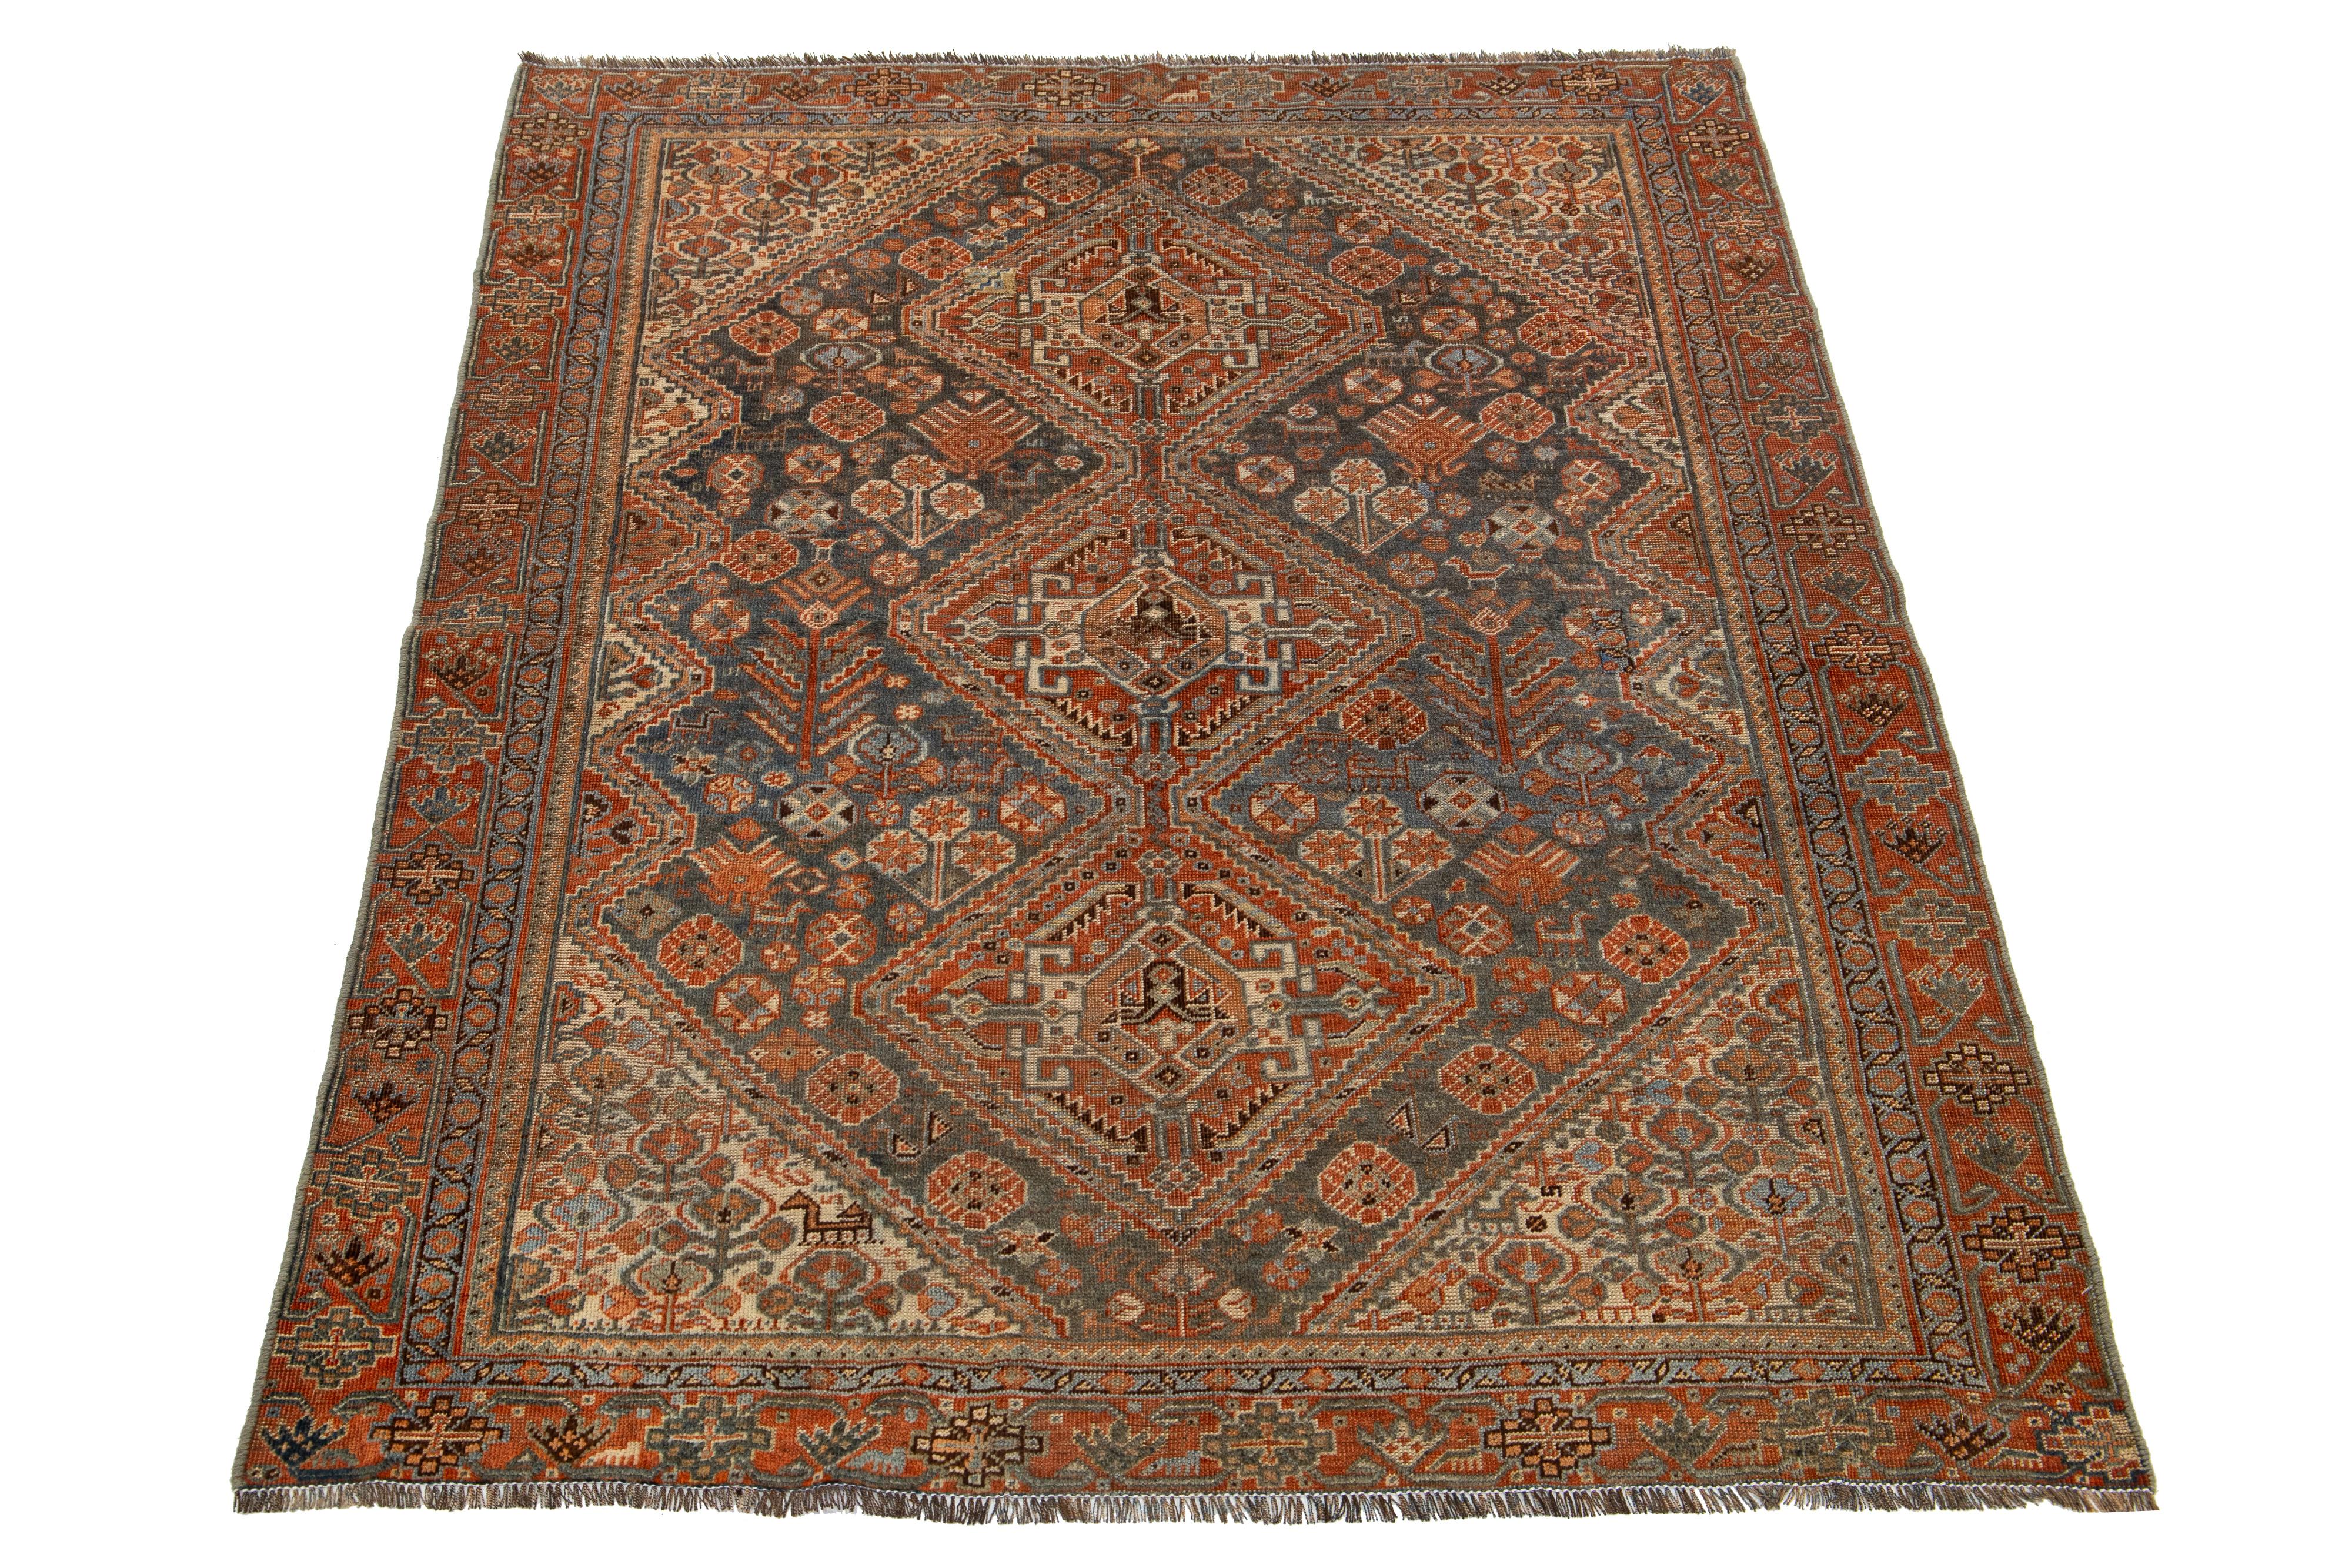 This Persian Shiraz wool rug displays a tribal design featuring stunning beige and rust accents on a blue background.

This rug measures 4'4